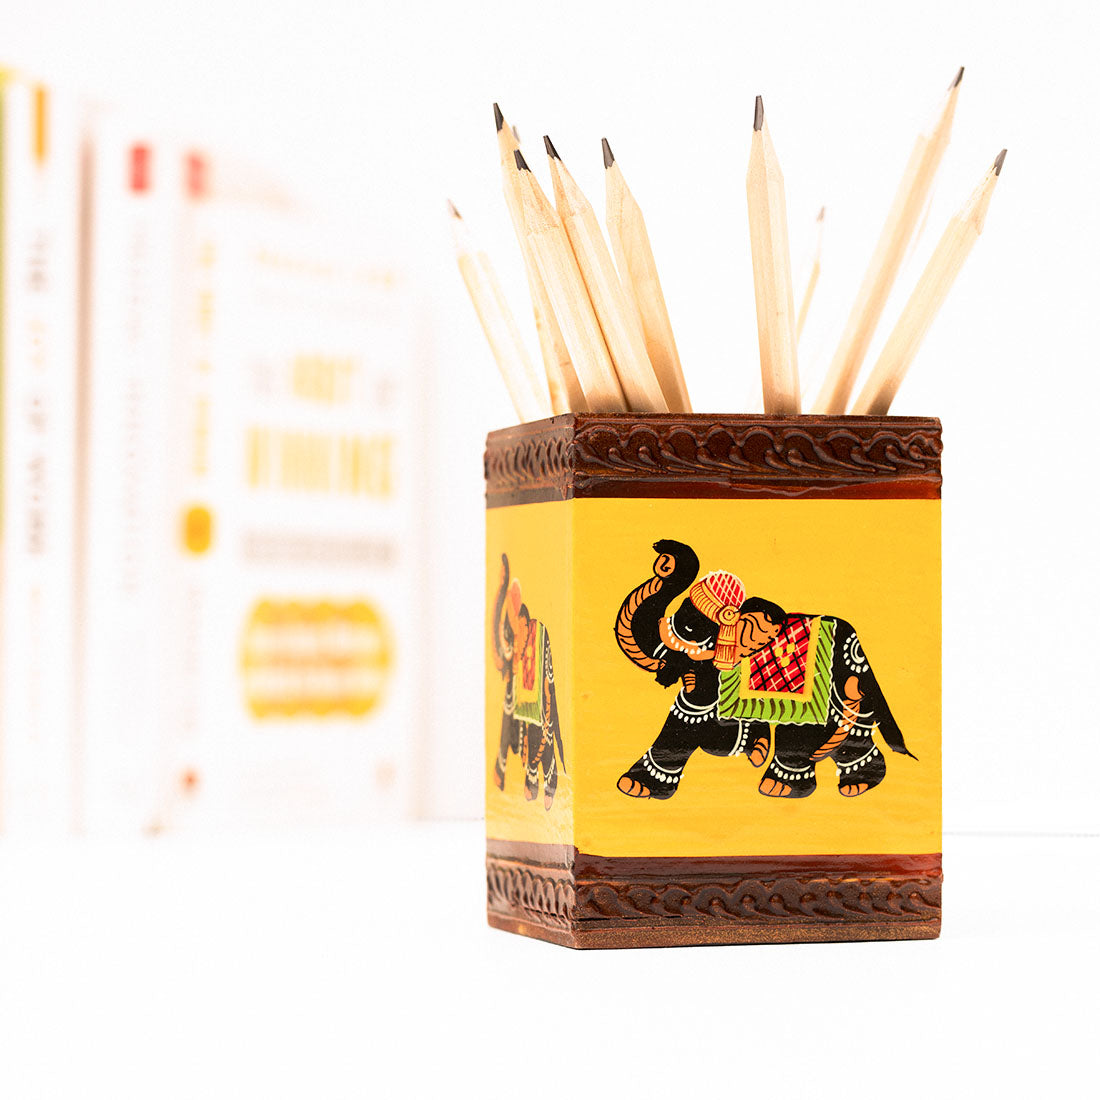 Wooden yellow pen stand with elephant motifs holding pencils placed on a white surface with a collection of books in the background.